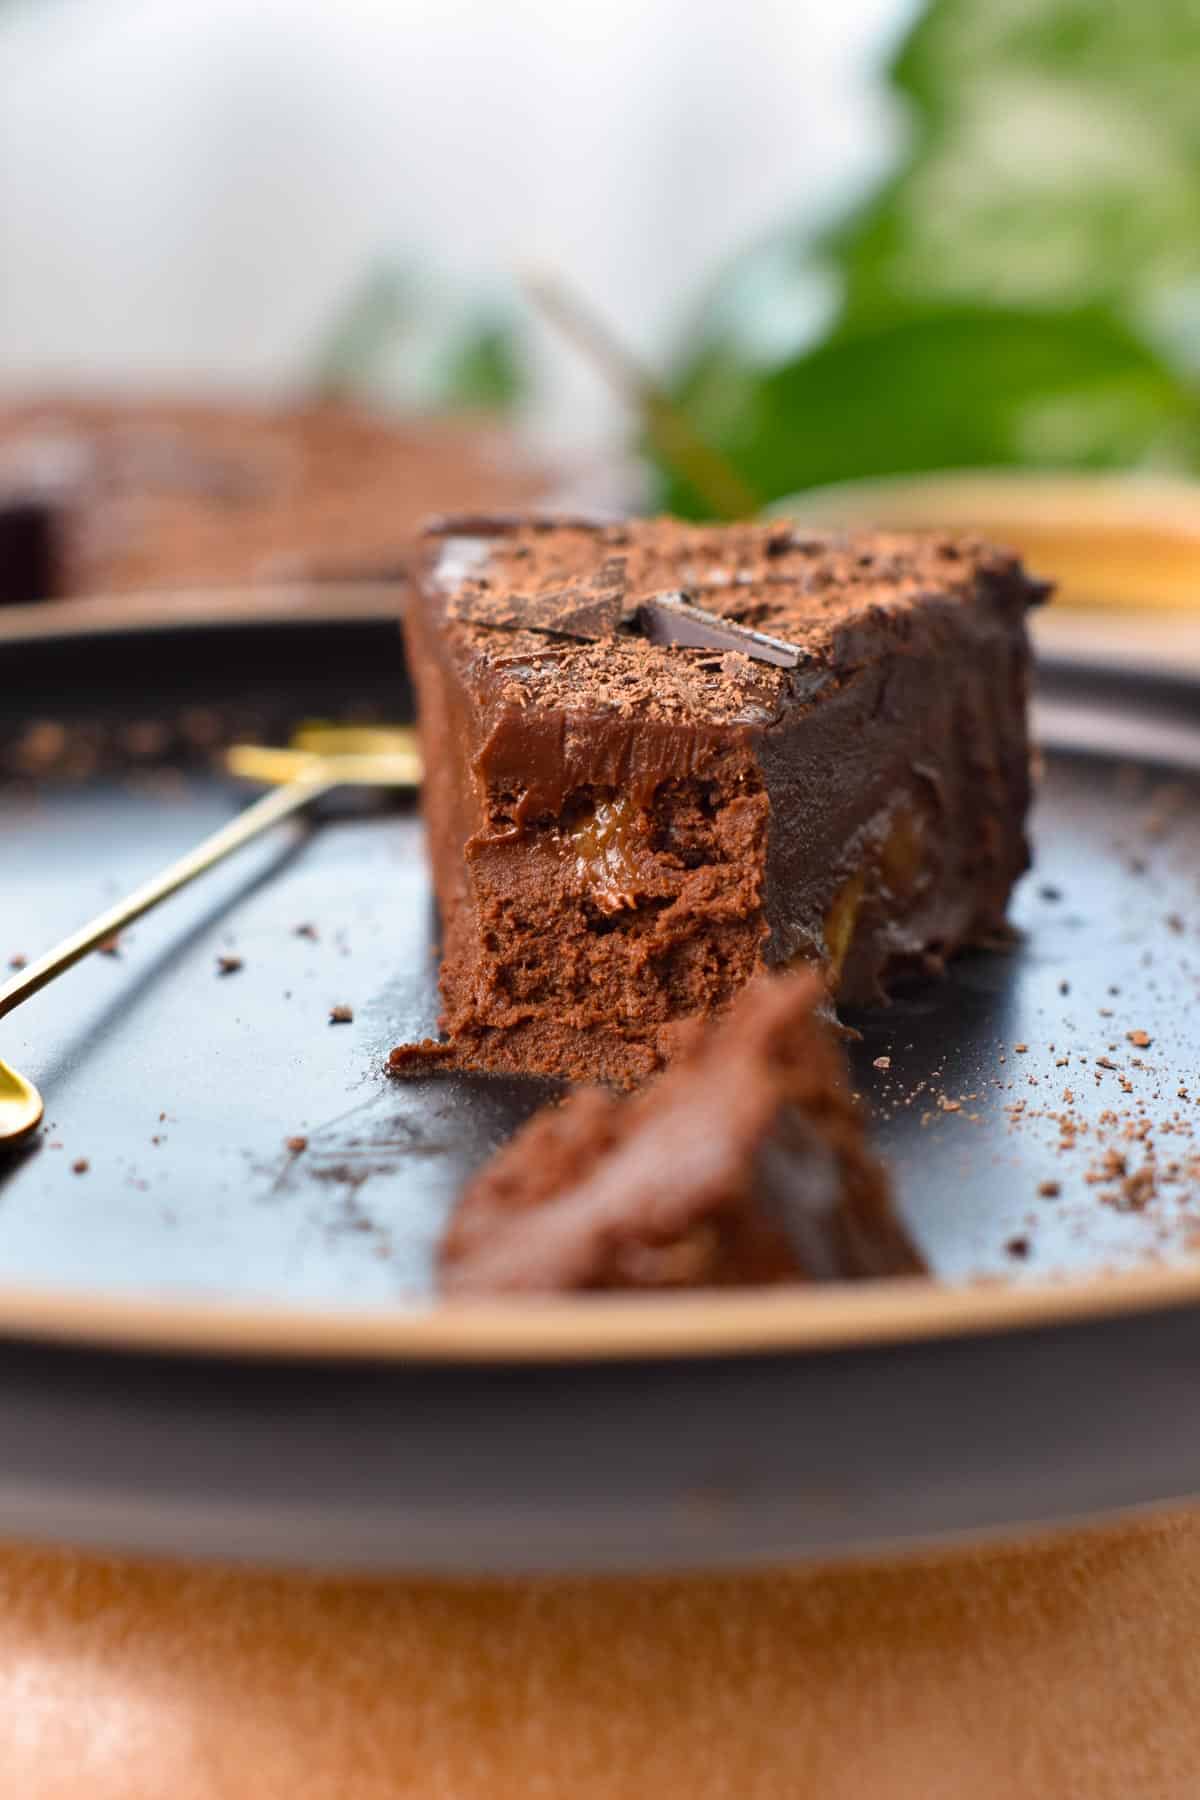 A slice of No Bake Chocolate Cake on a black plate, with a golden fork on the side and the front of the cake slice half cut.